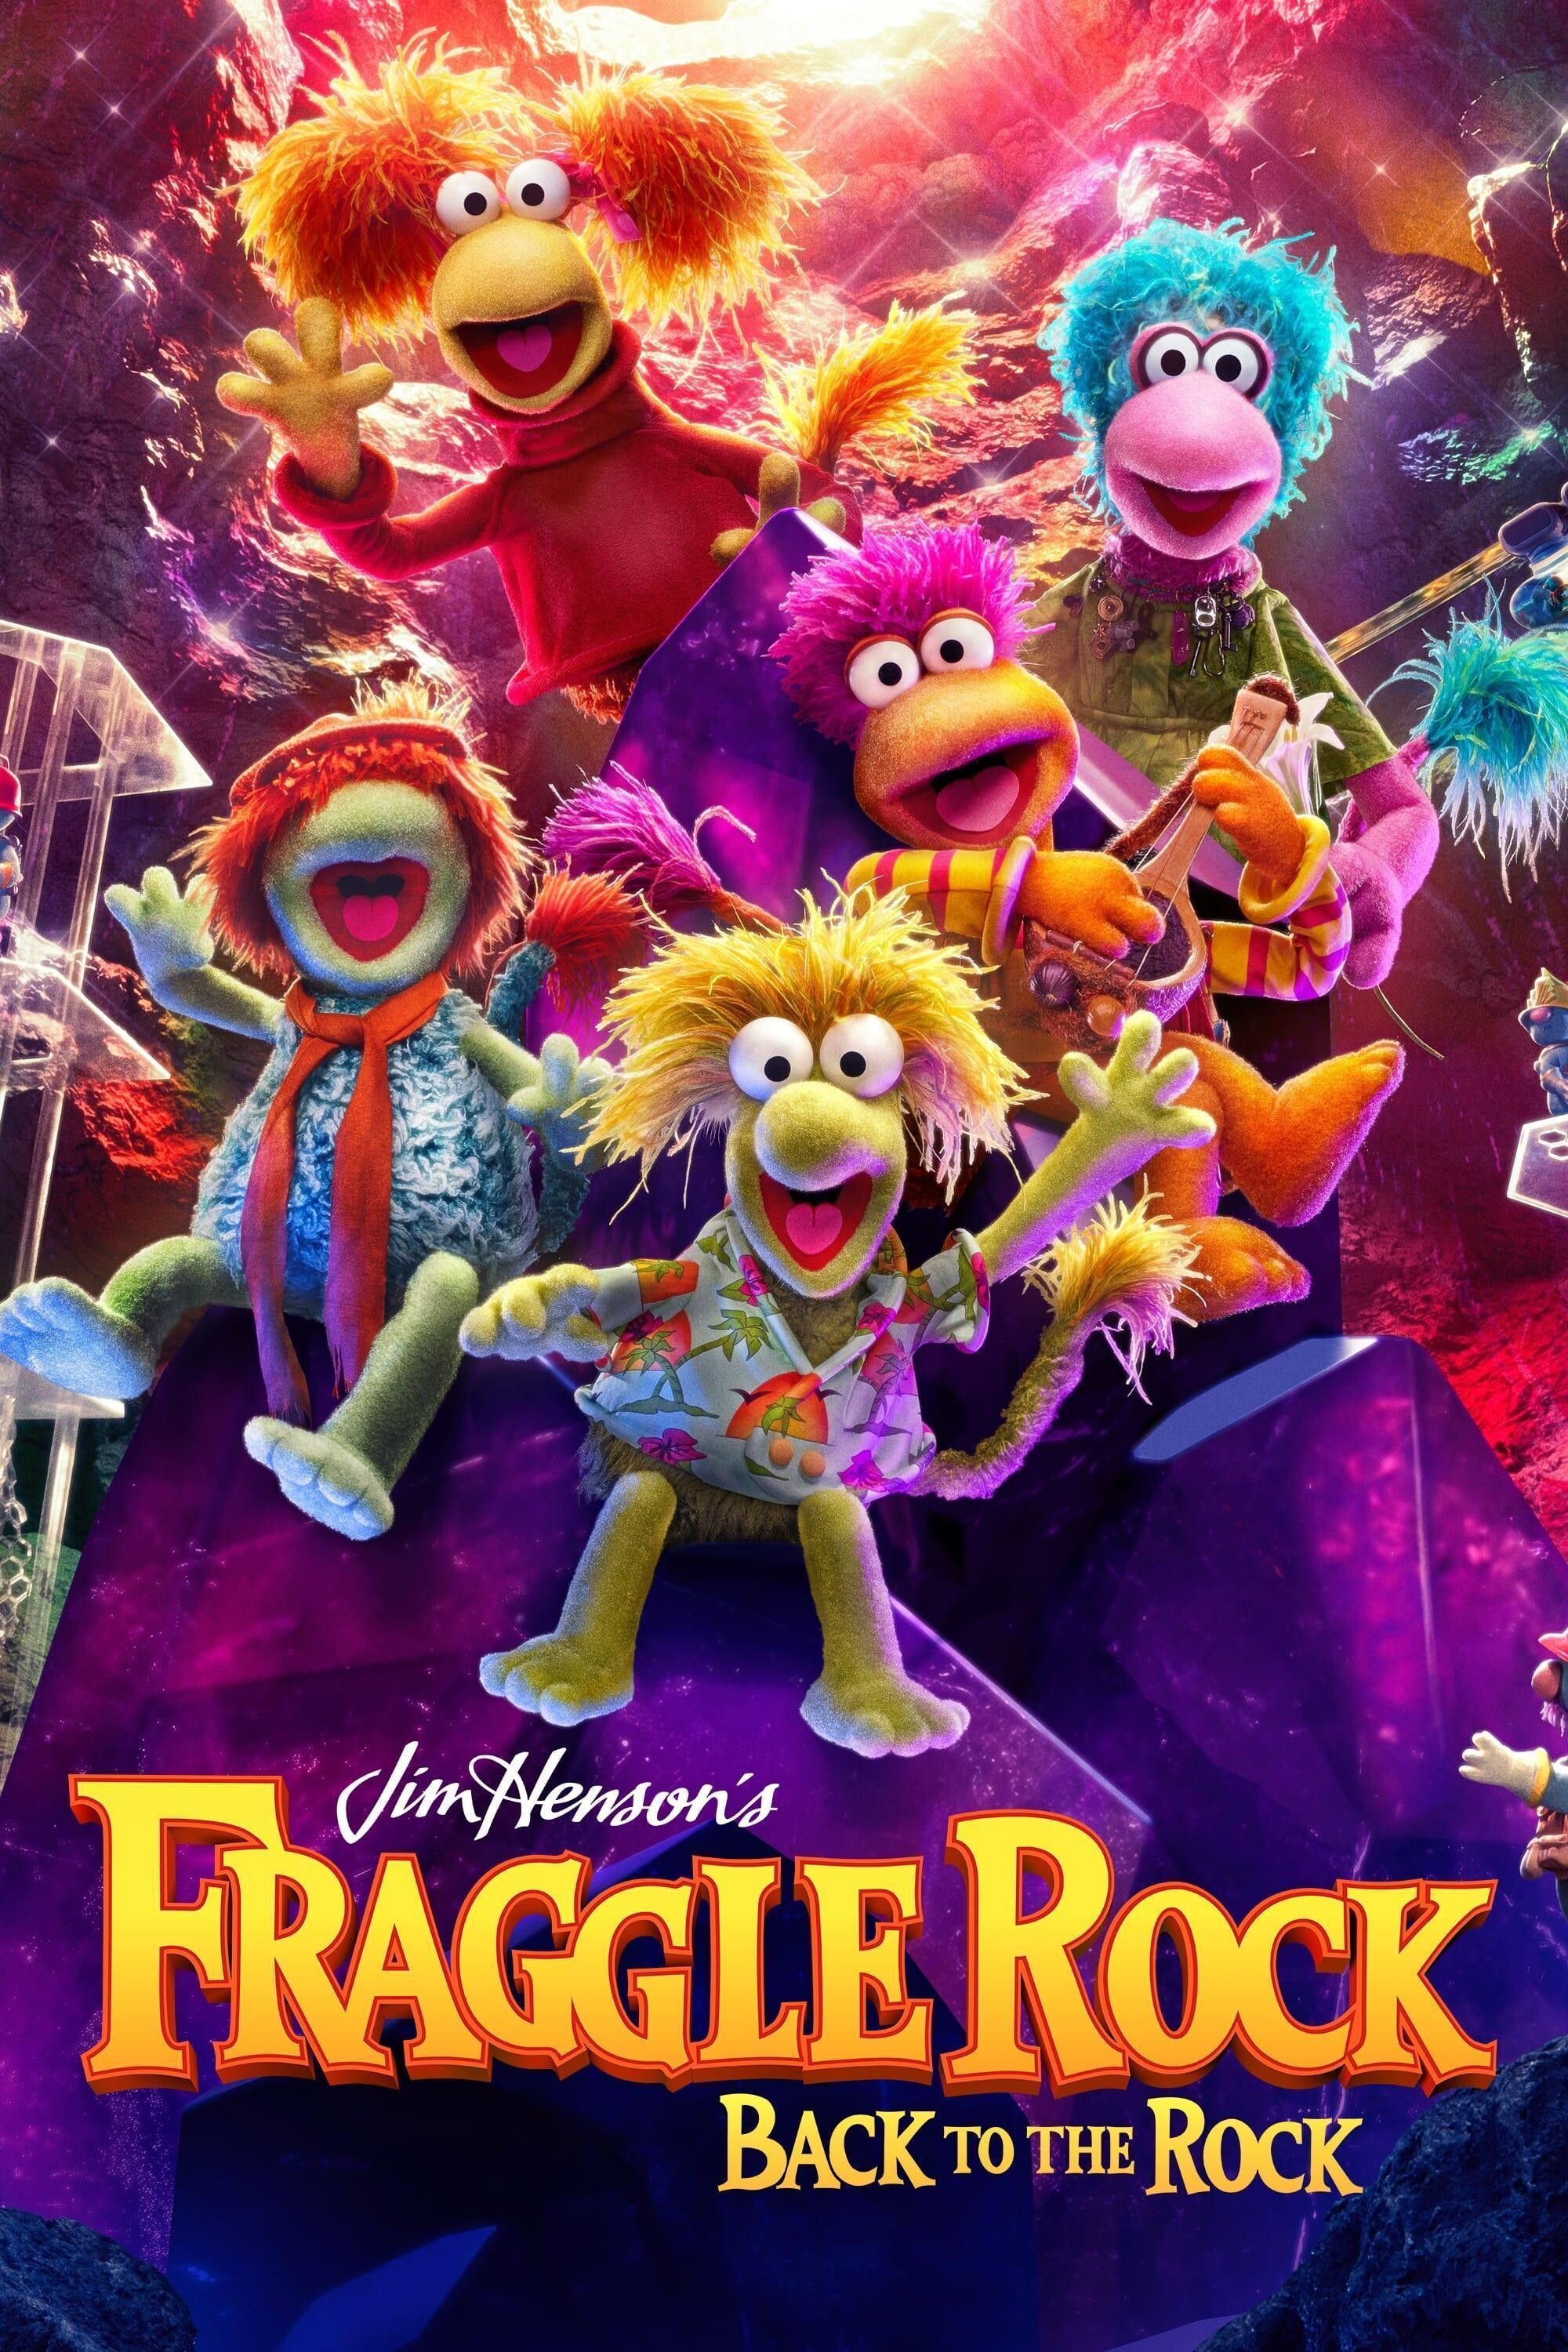 Fraggle Rock: Back to the Rock Trailer Shows the Fraggles Returning